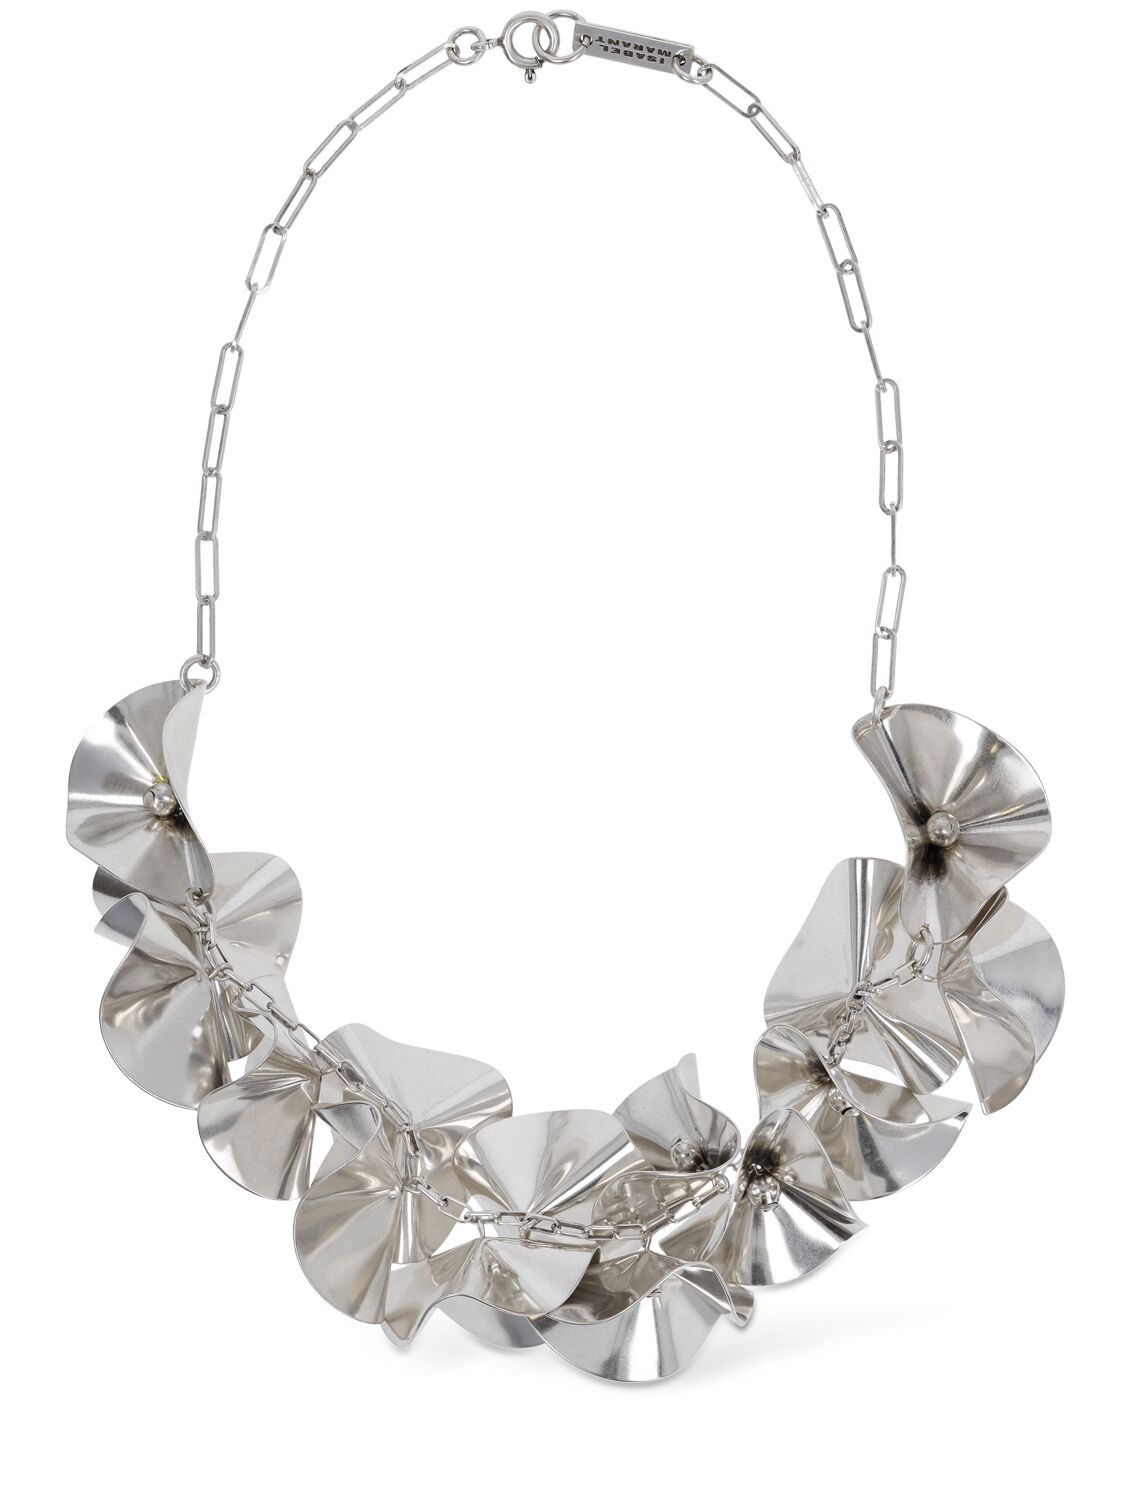 Isabel Marant Flower Power Collar Necklace In Silver